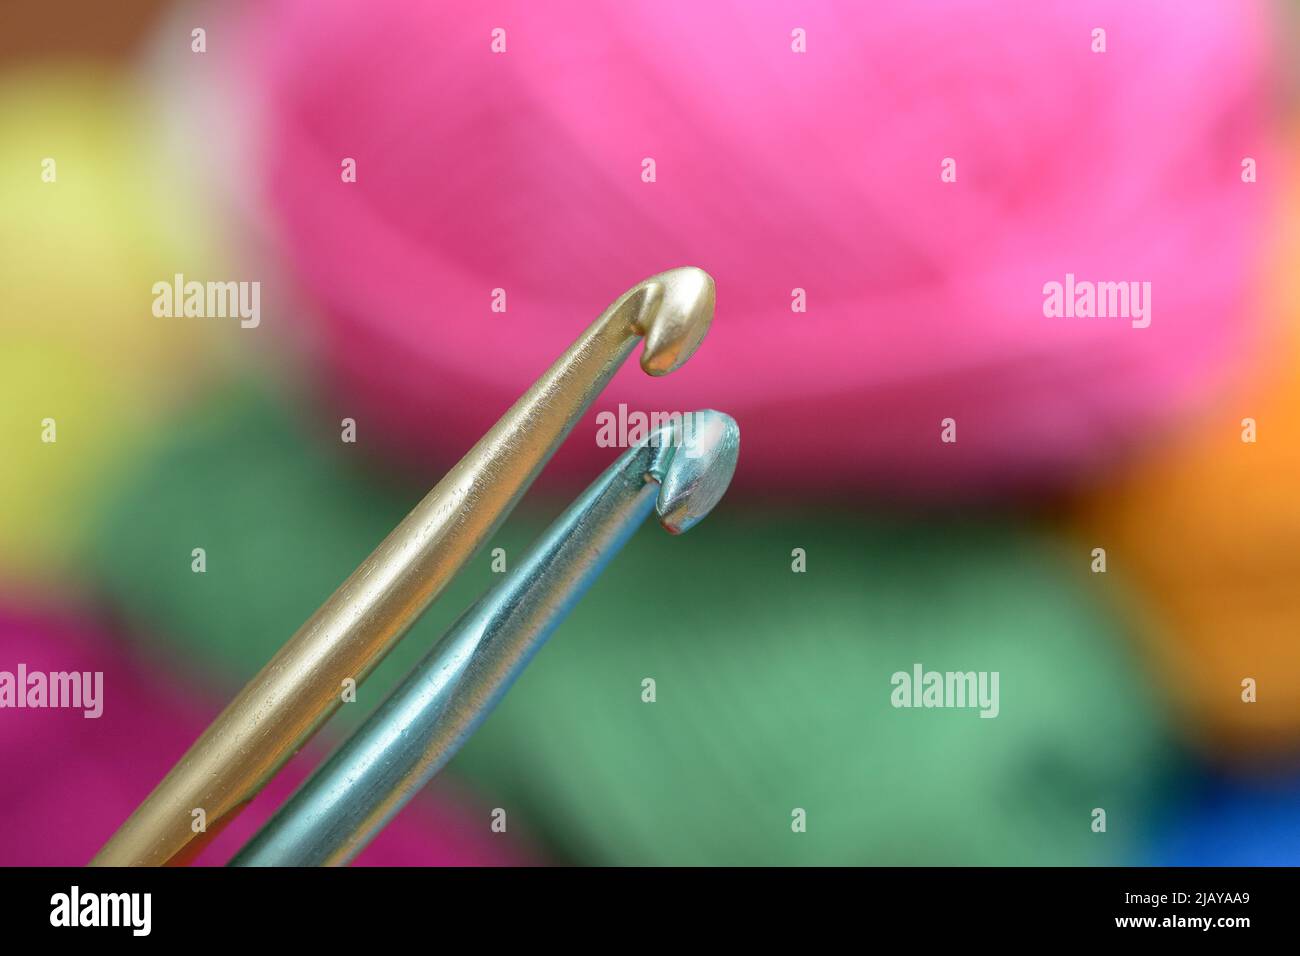 two crochet hooks on a background of colorful wool Stock Photo